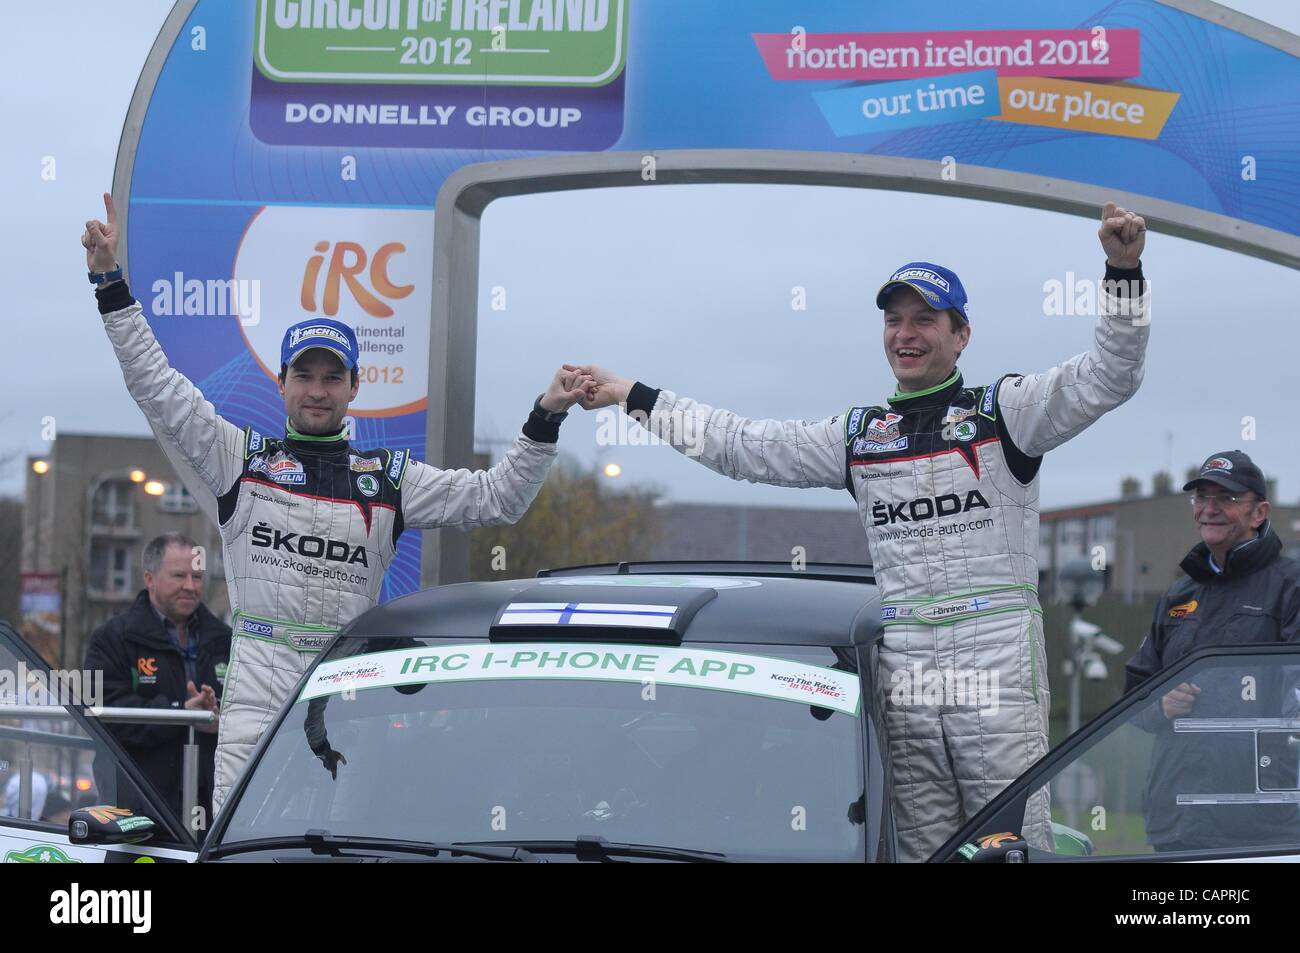 Finnish driver Juho Hanninen, right, celebrates with his navigator Mikko Markkula as they win the Circuit of Ireland International Rally in Armagh, Northern Ireland 7 April 2012. The Circuit of Ireland Rally is the third round of Intercontinental Rally Challenge 2012. Stock Photo